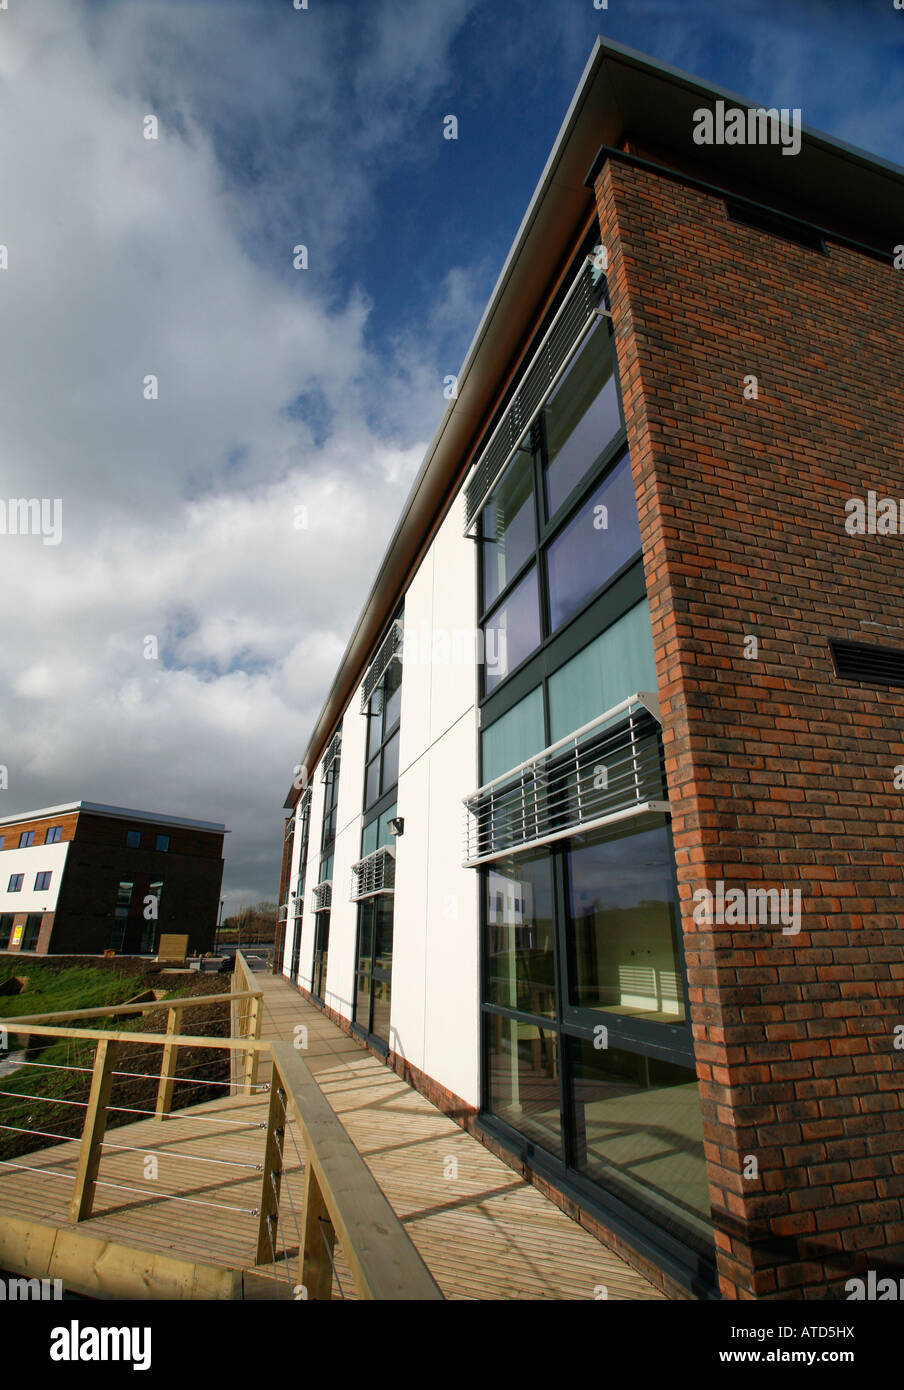 Exterior shot of an exterior of 2 storey office buildings in a modern business park. Stock Photo